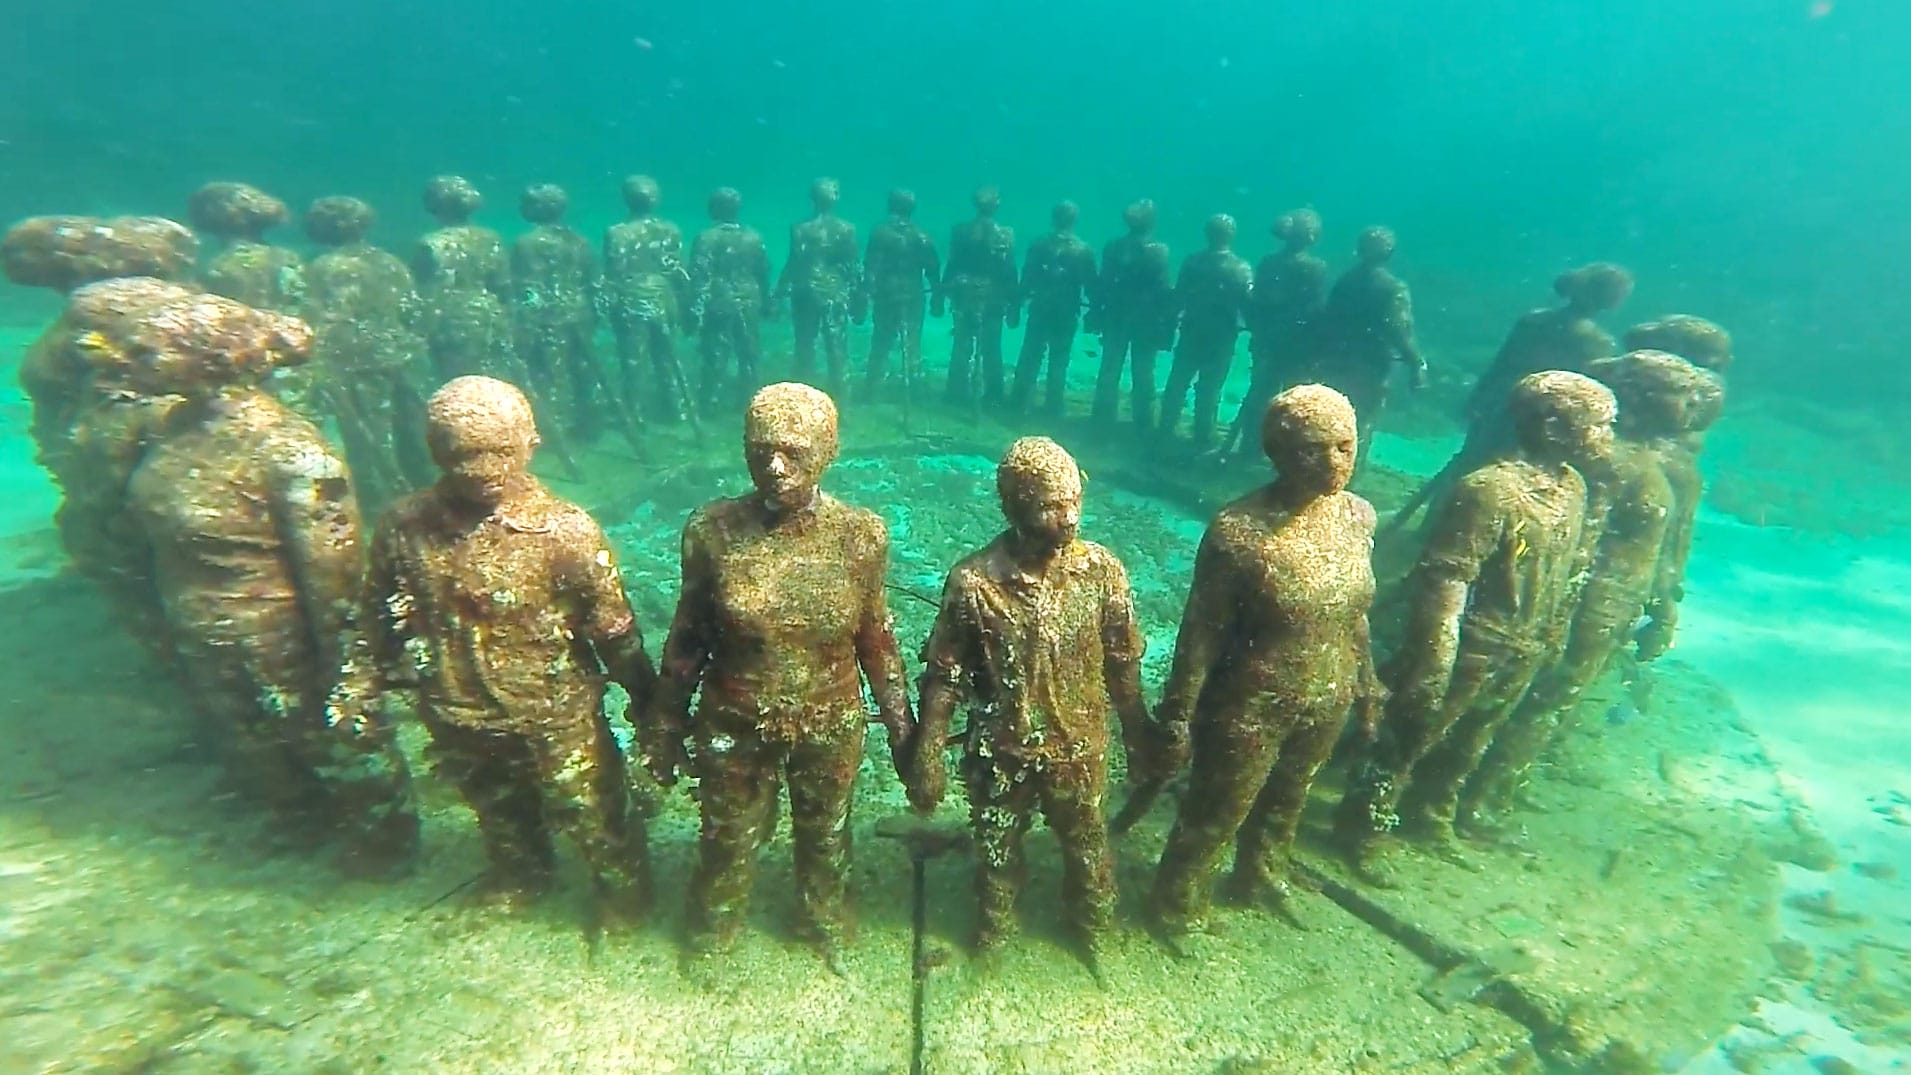 The Molinere Underwater Sculpture Park in Grenada was designed by British sculptor Jason deCaires Taylor and is thought to be a tribute to enslaved African people